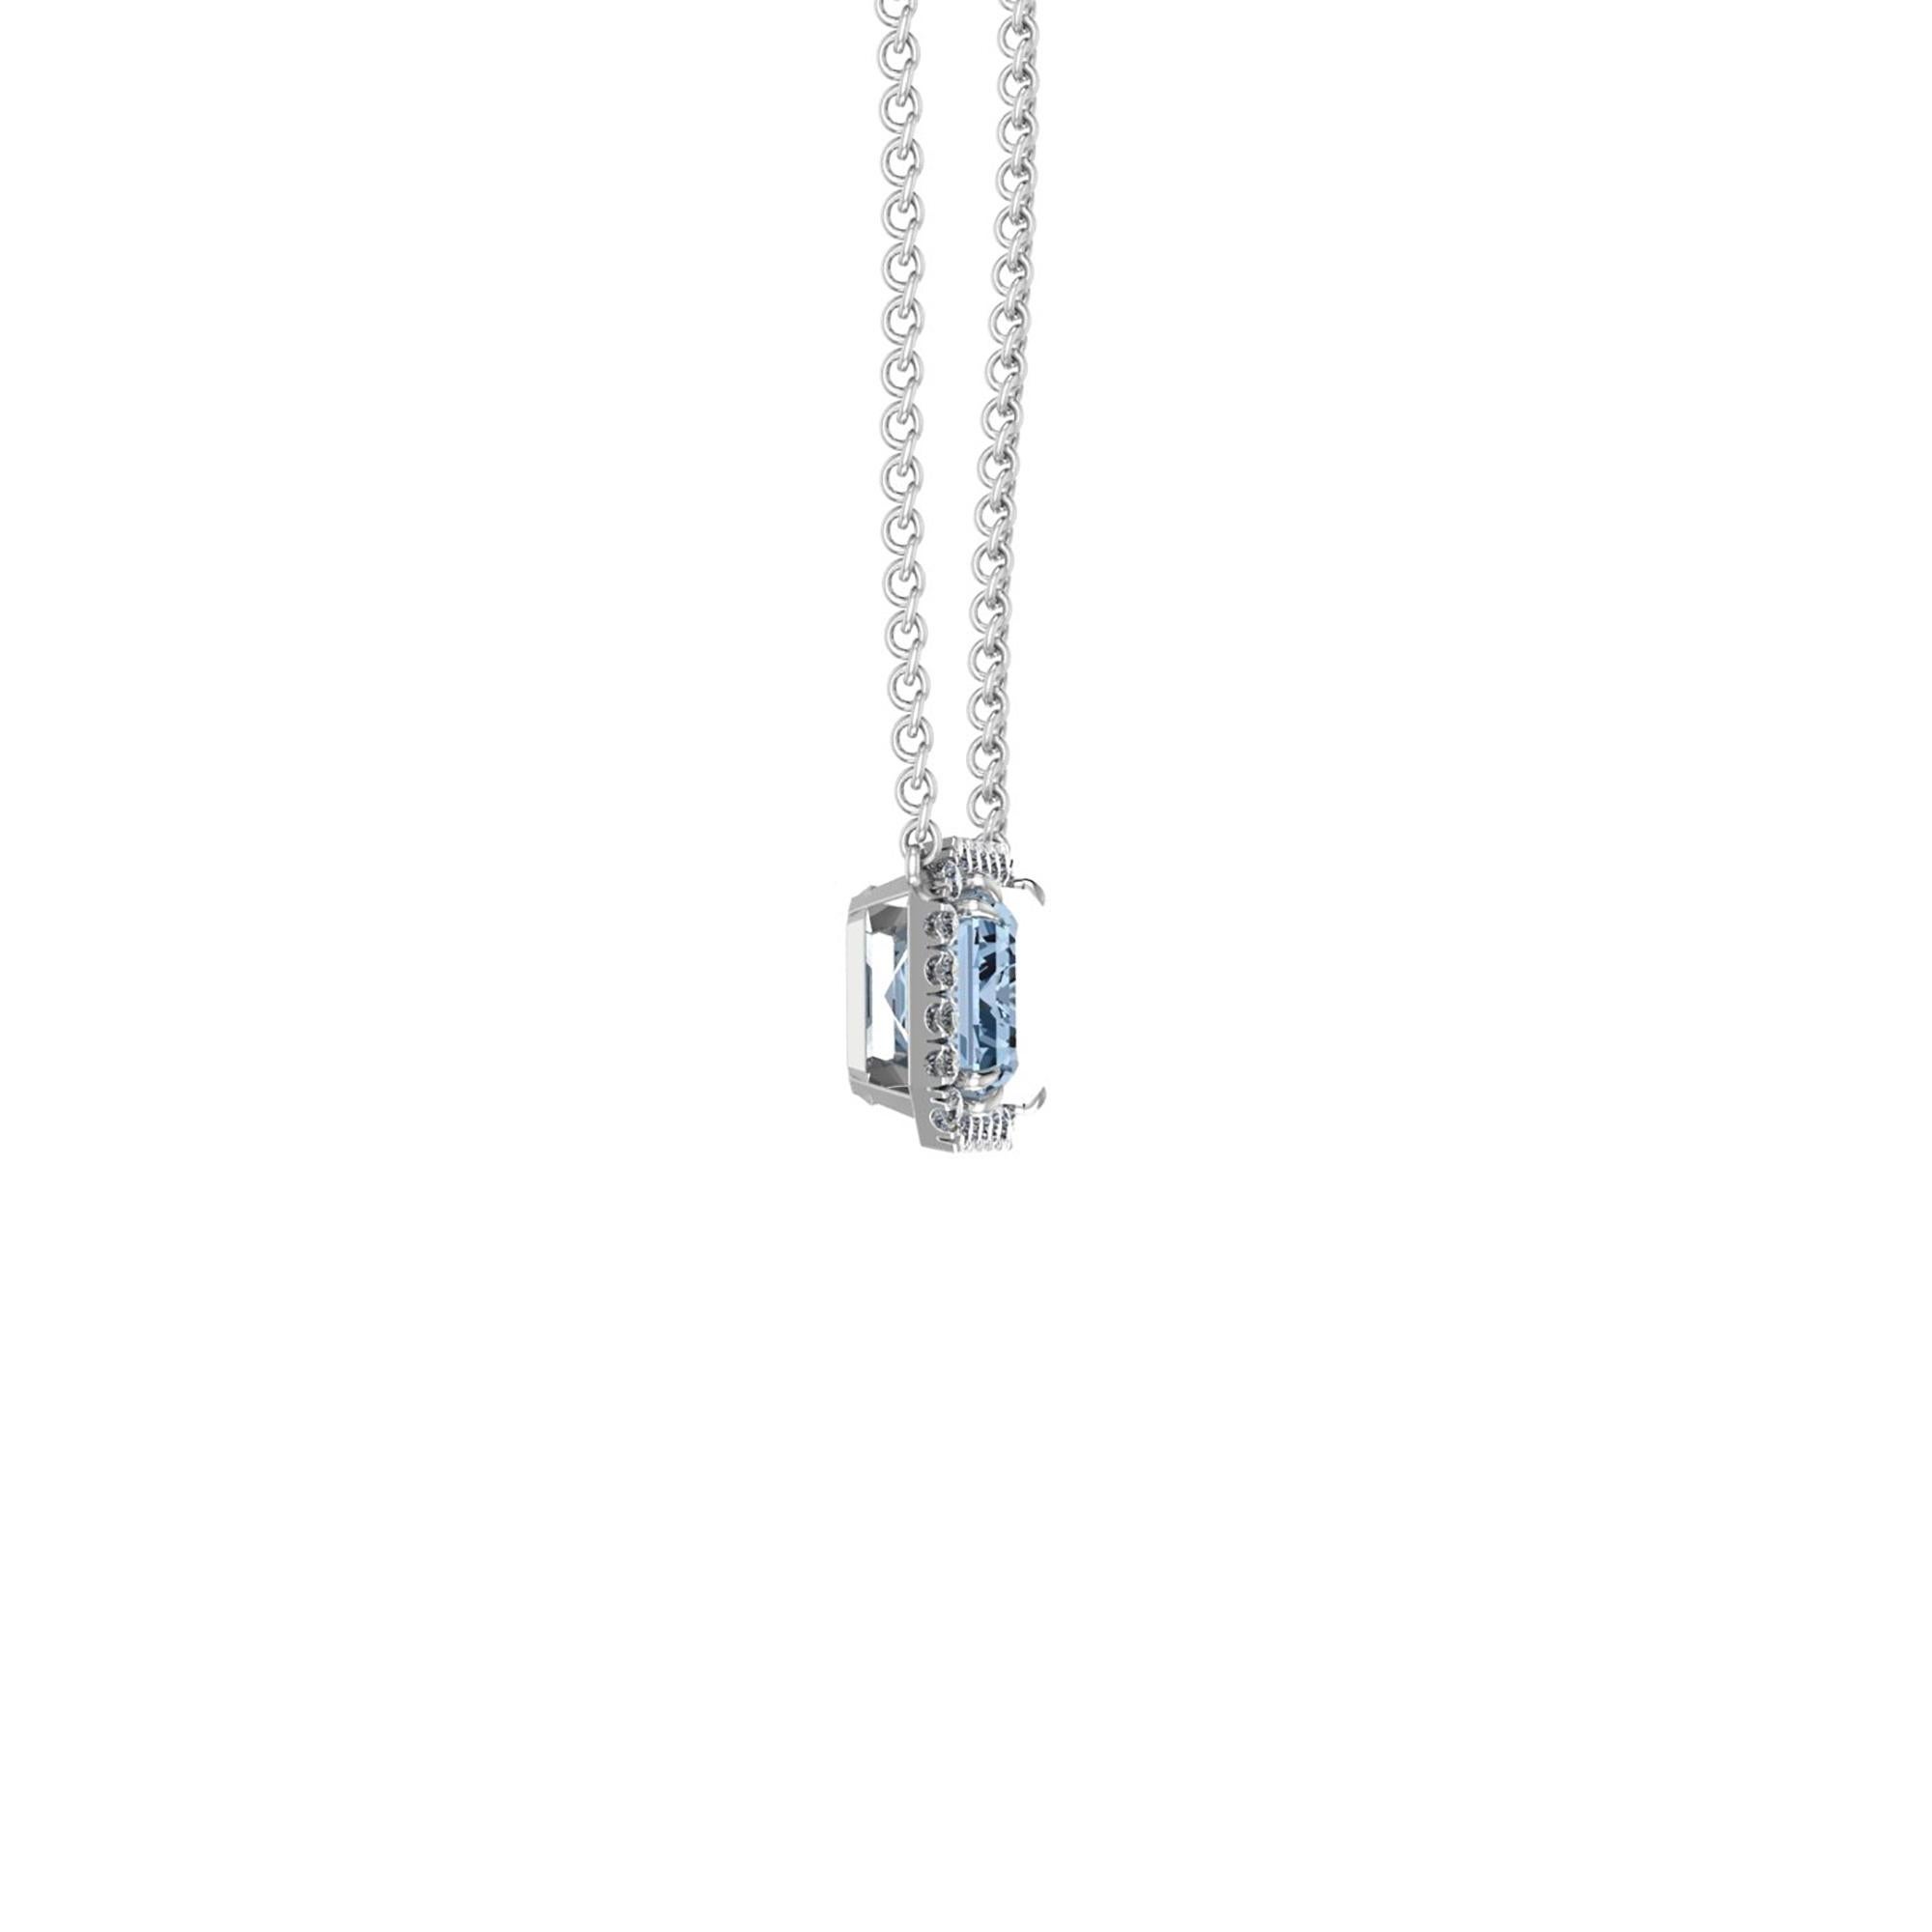 4.54 carat Aquamarine, emerald cut, very high quality color, eye clean gem, set in a made to perfection Platinum 950 double claw prongs with white diamond Halo of approximately 0.22 carat diamonds hand set.
The necklace length can be adjusted at 18